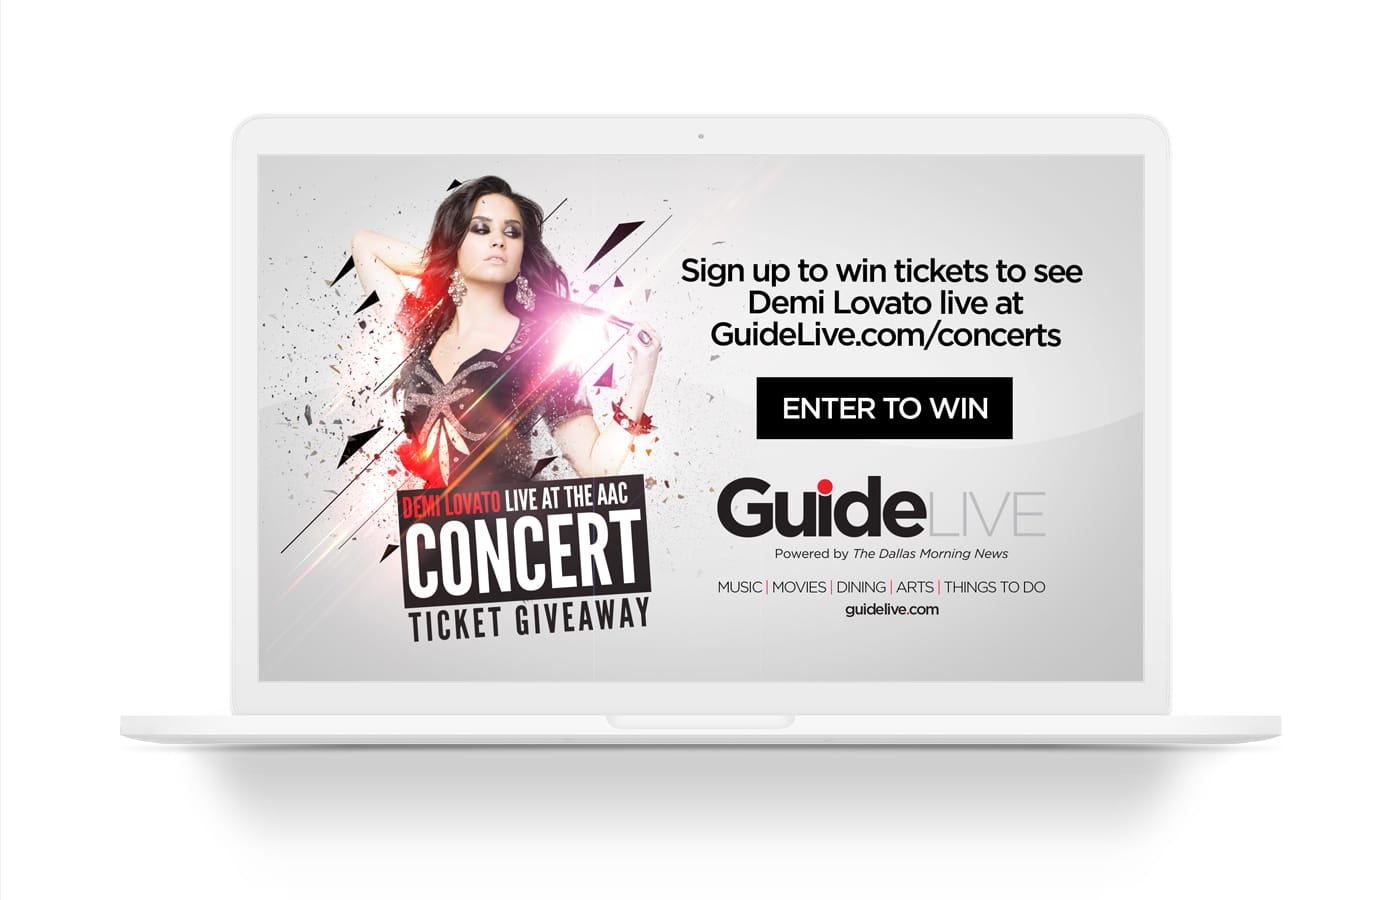 The Dallas Morning News - Demi Lovato Concert Giveaway Concept | Enormous Elephant